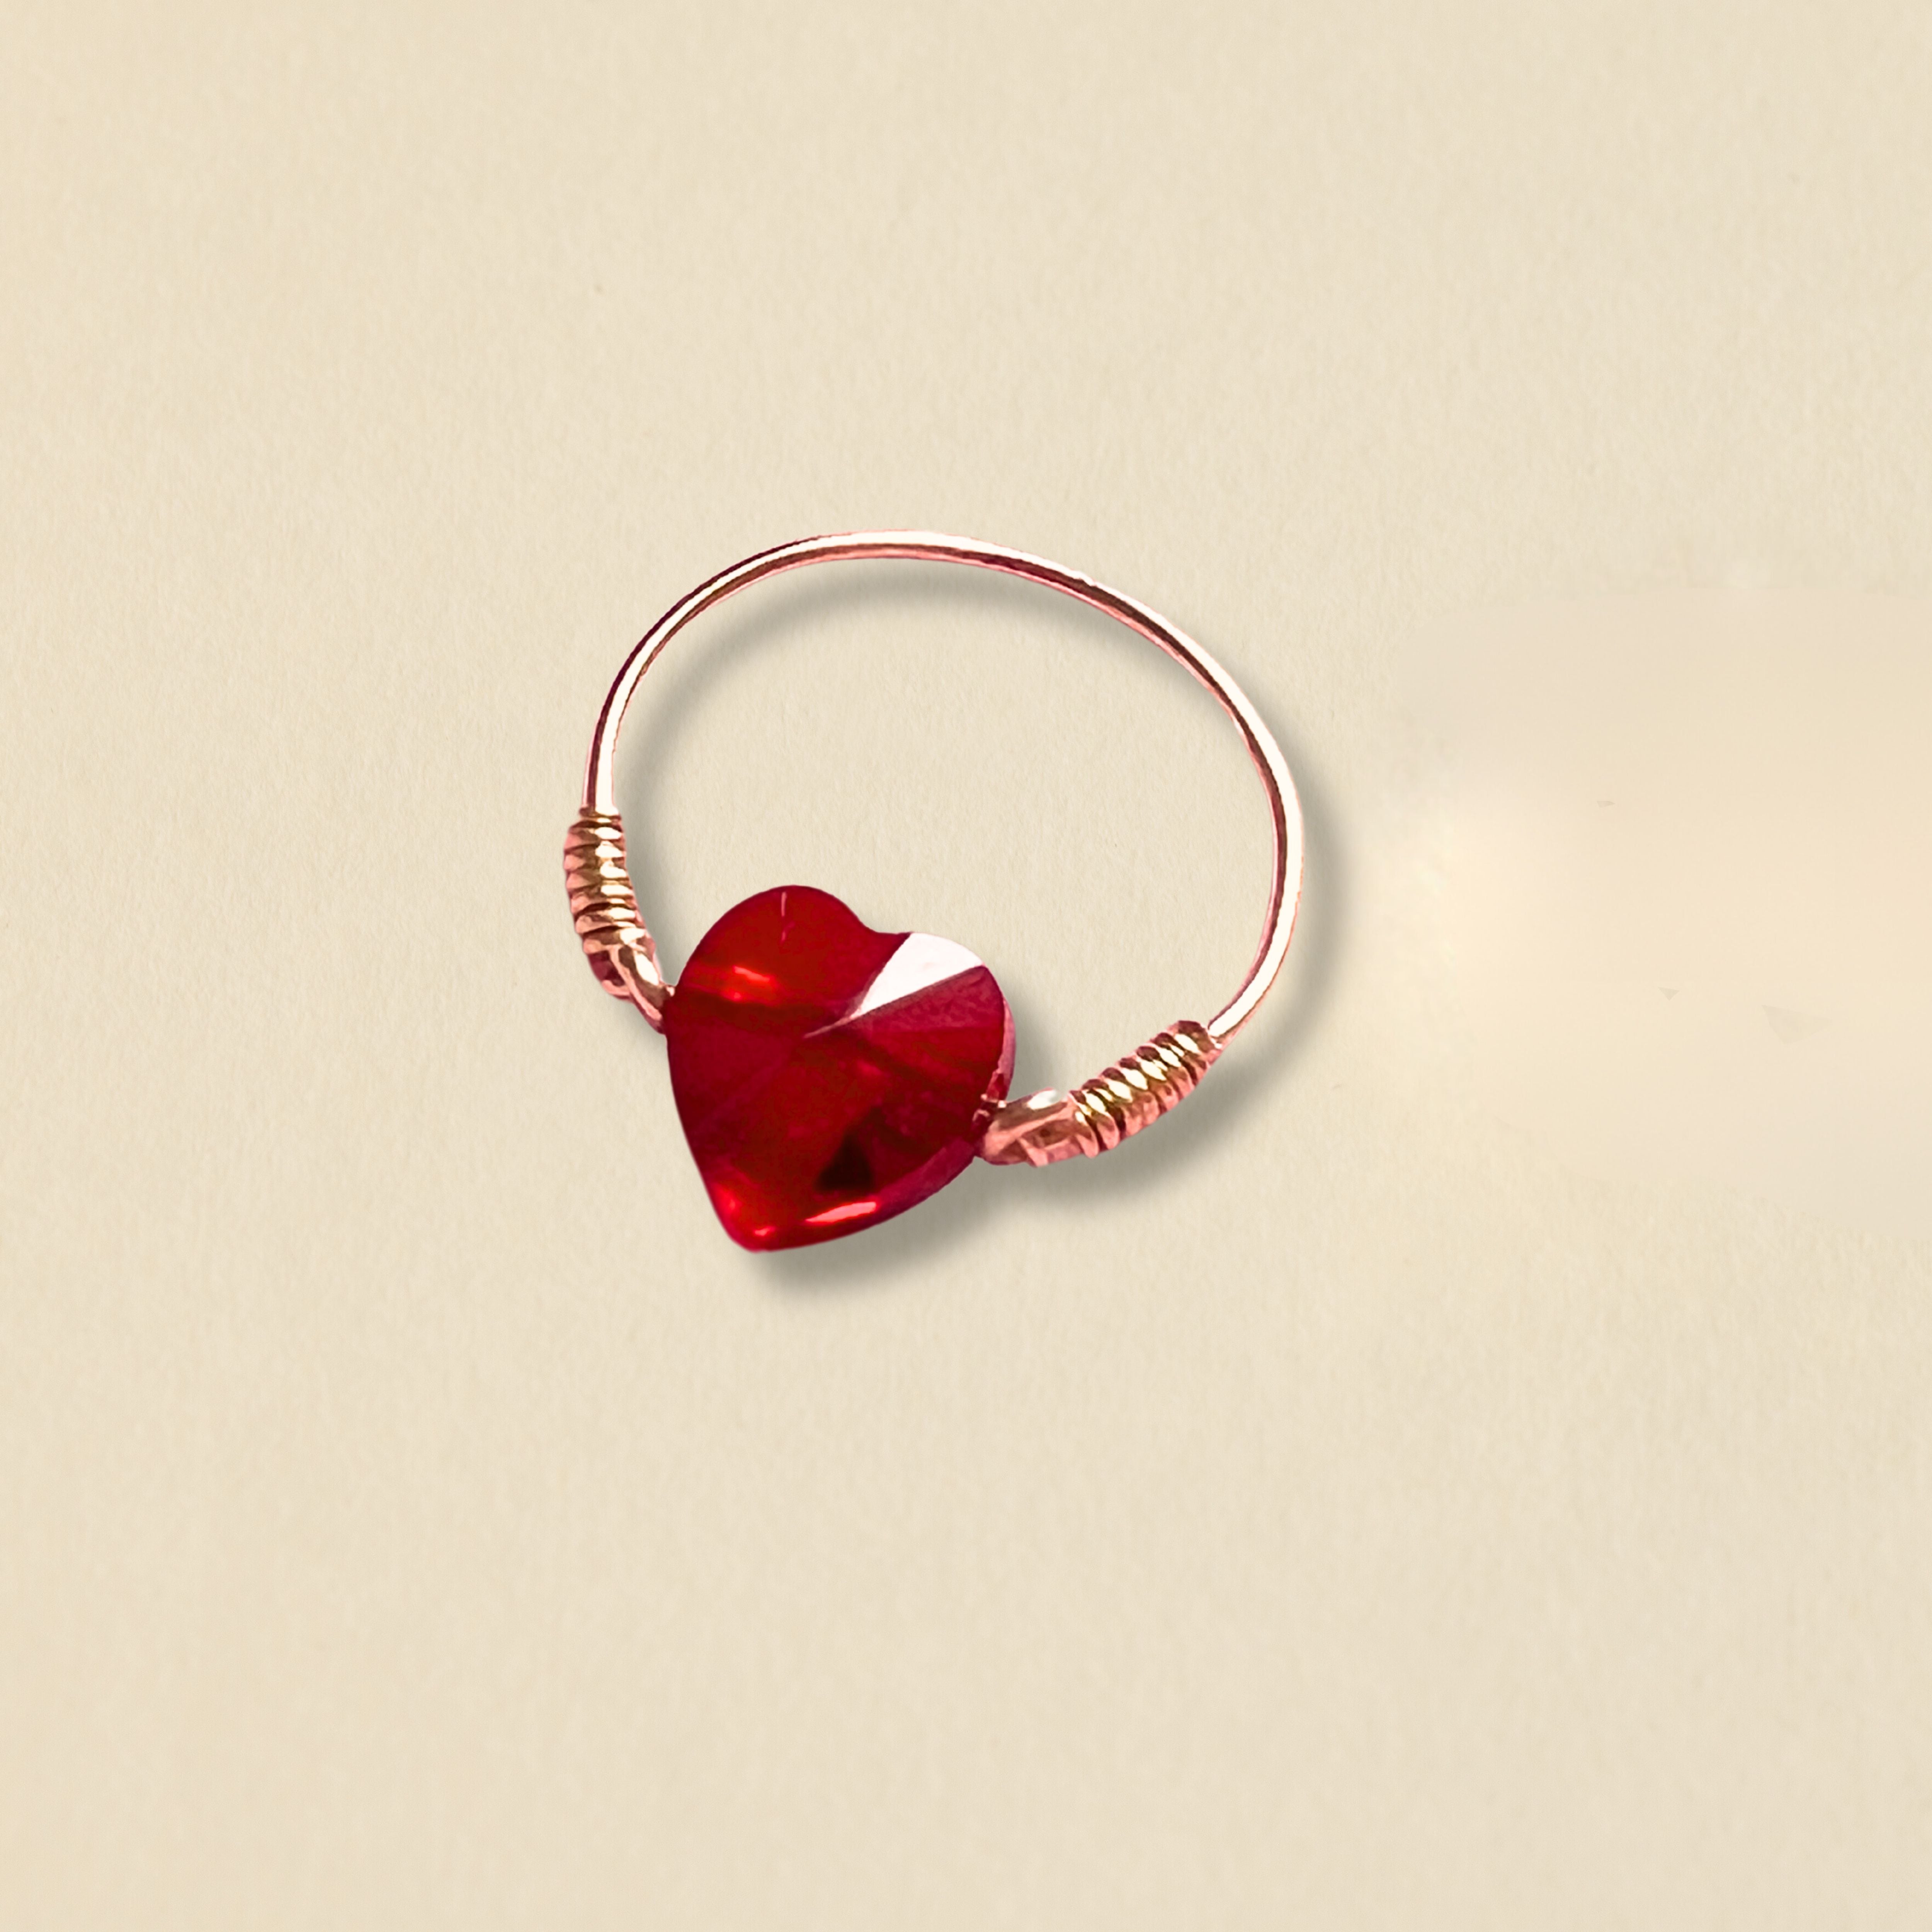 NEW - Bague Candy Coeur